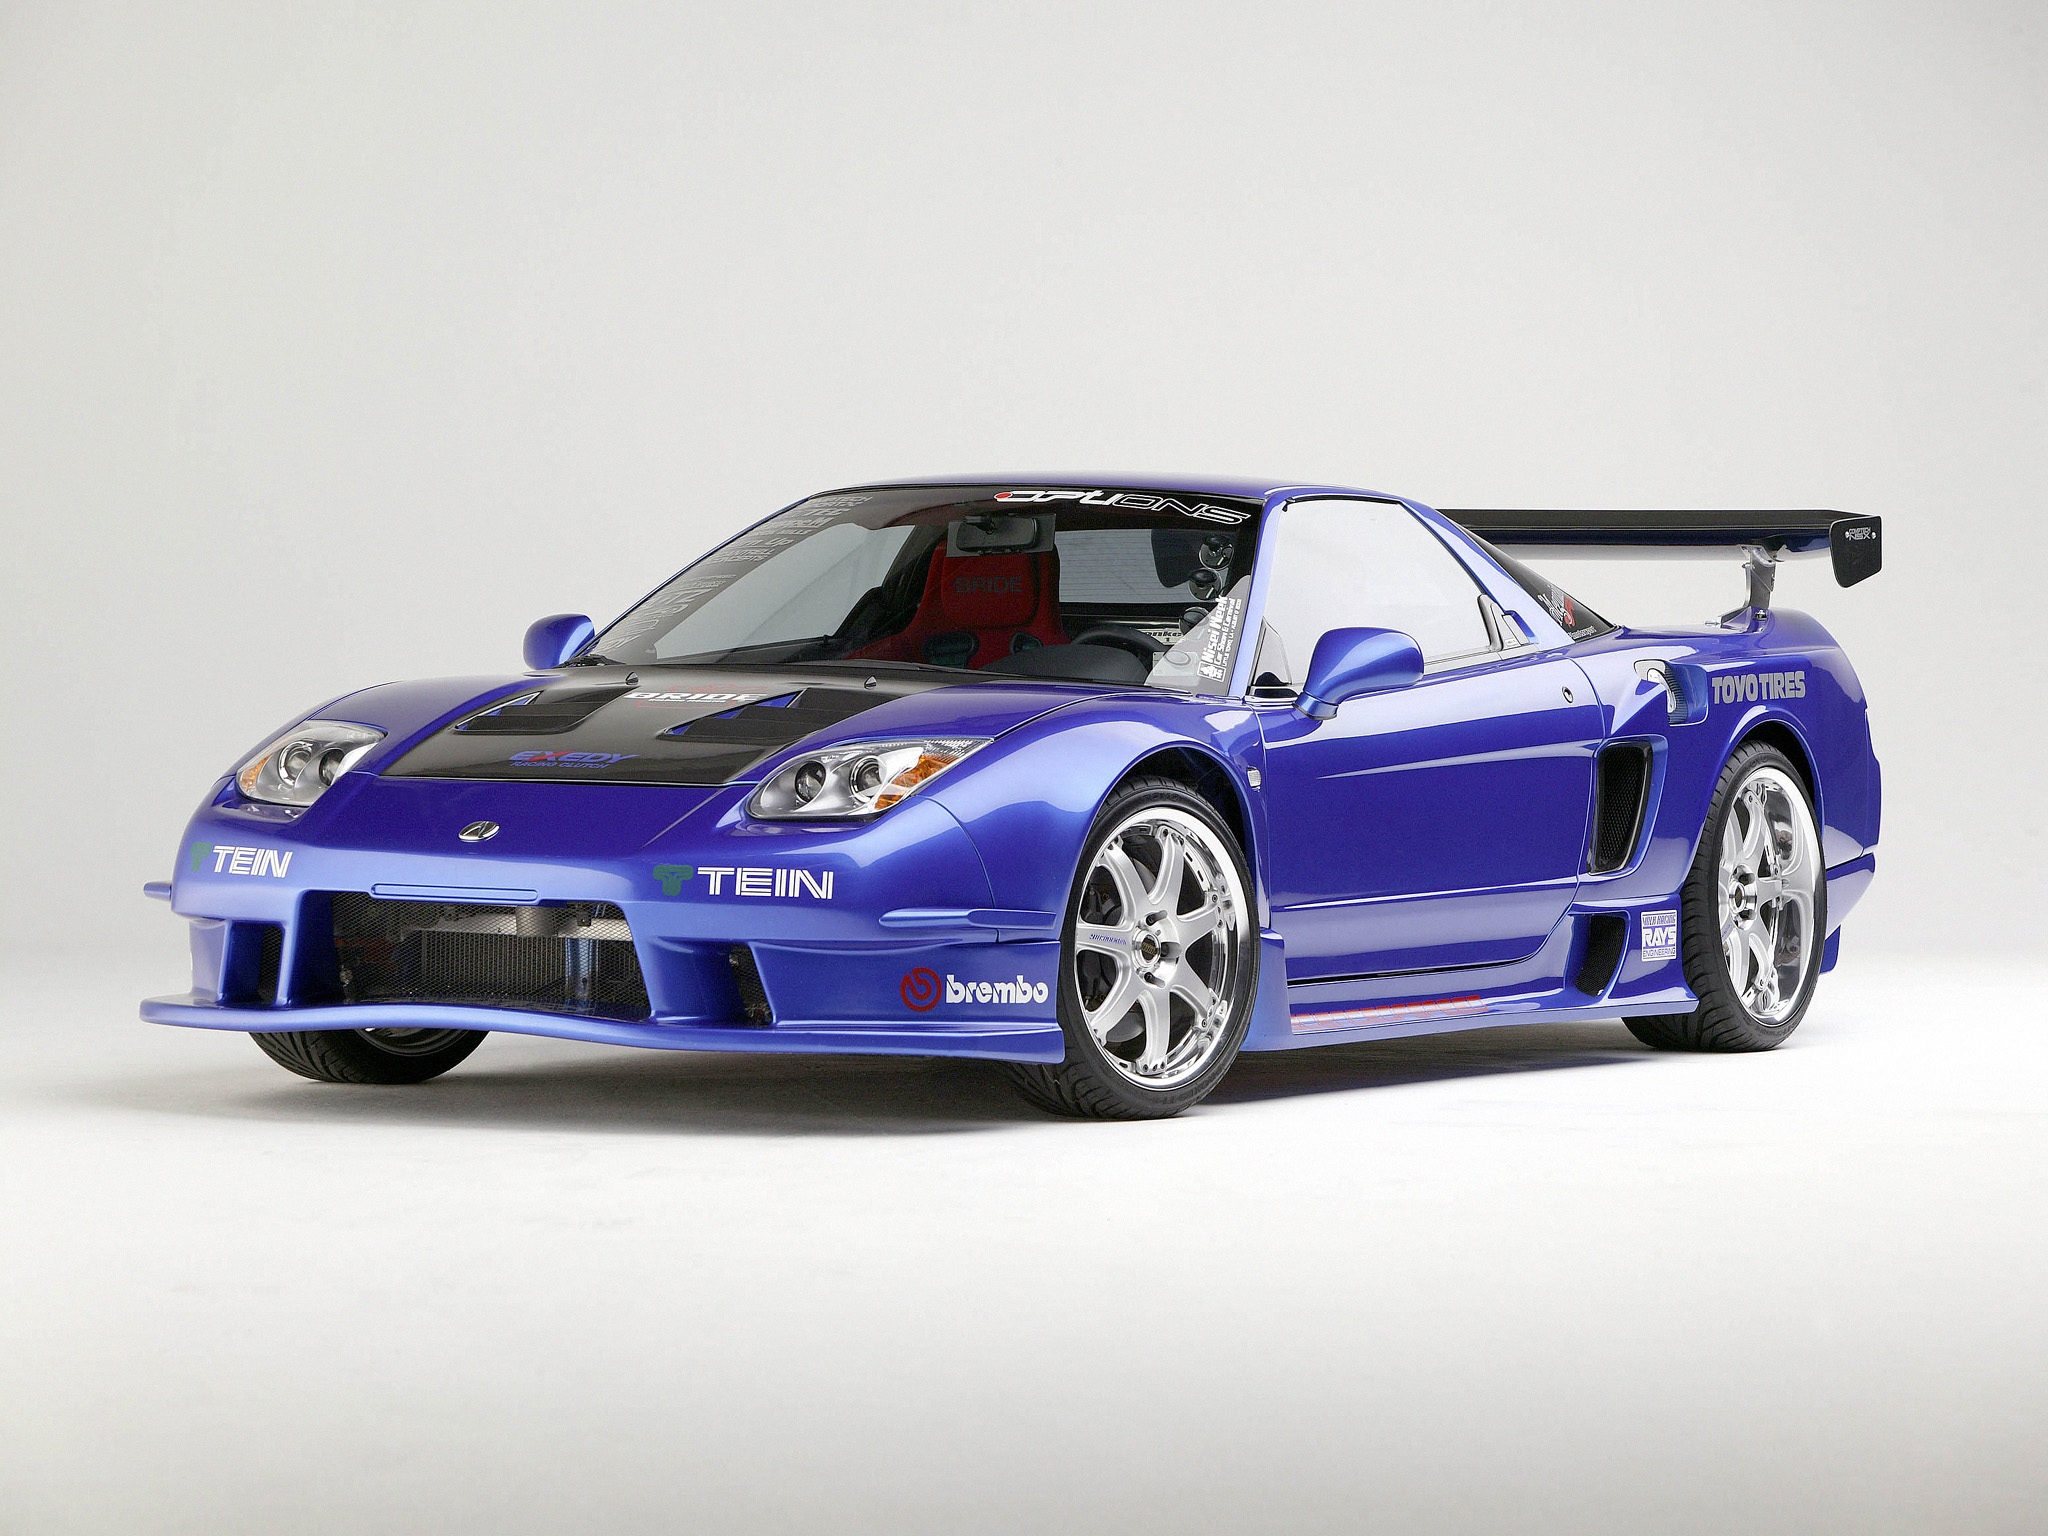 nsh, sports, auto, acura, cars, blue, front view, style, akura, 2003, nsx, hsx